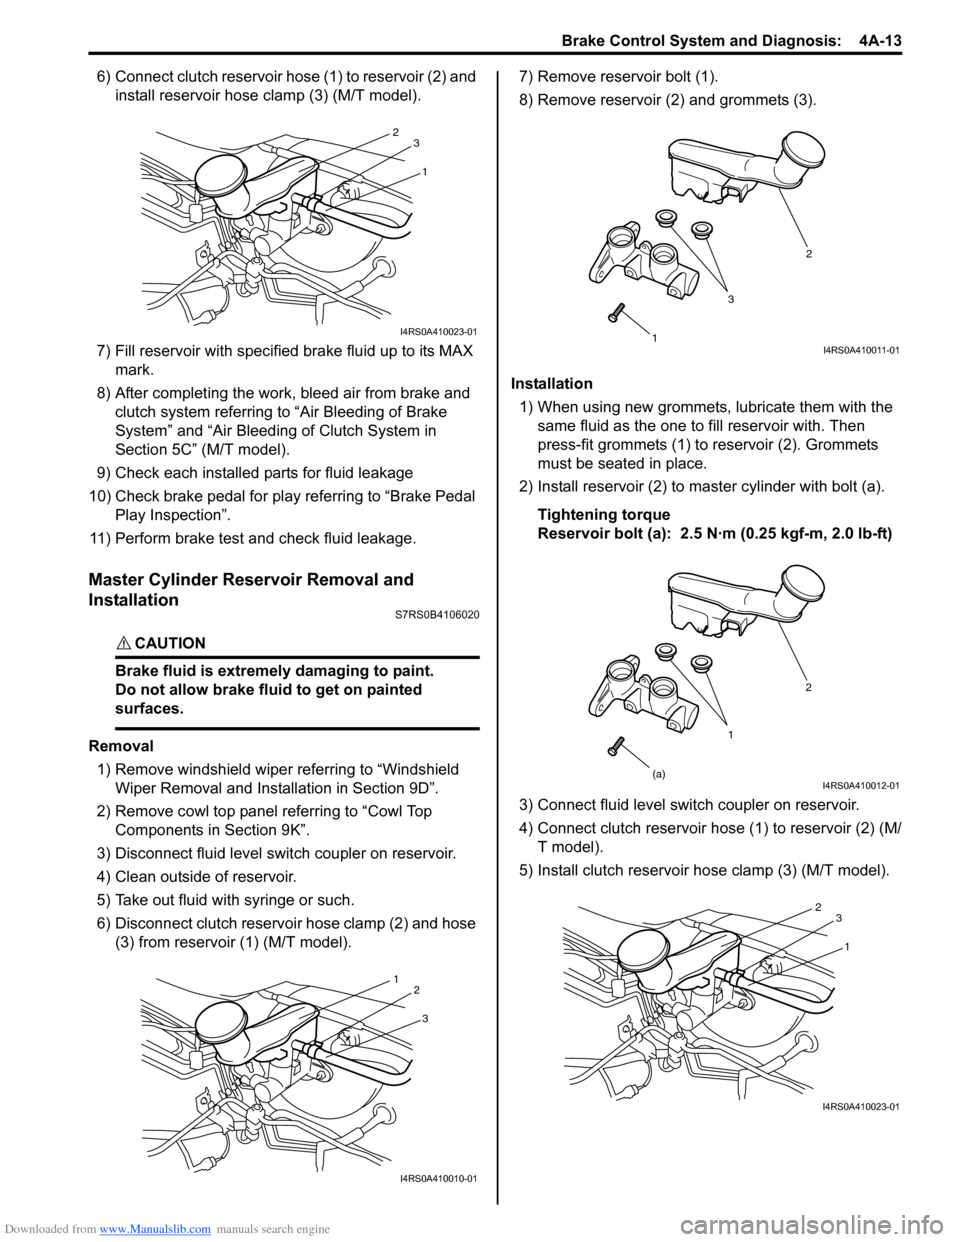 SUZUKI SWIFT 2006 2.G Service Workshop Manual Downloaded from www.Manualslib.com manuals search engine Brake Control System and Diagnosis:  4A-13
6) Connect clutch reservoir hose (1) to reservoir (2) and install reservoir hose clamp (3) (M/T mode